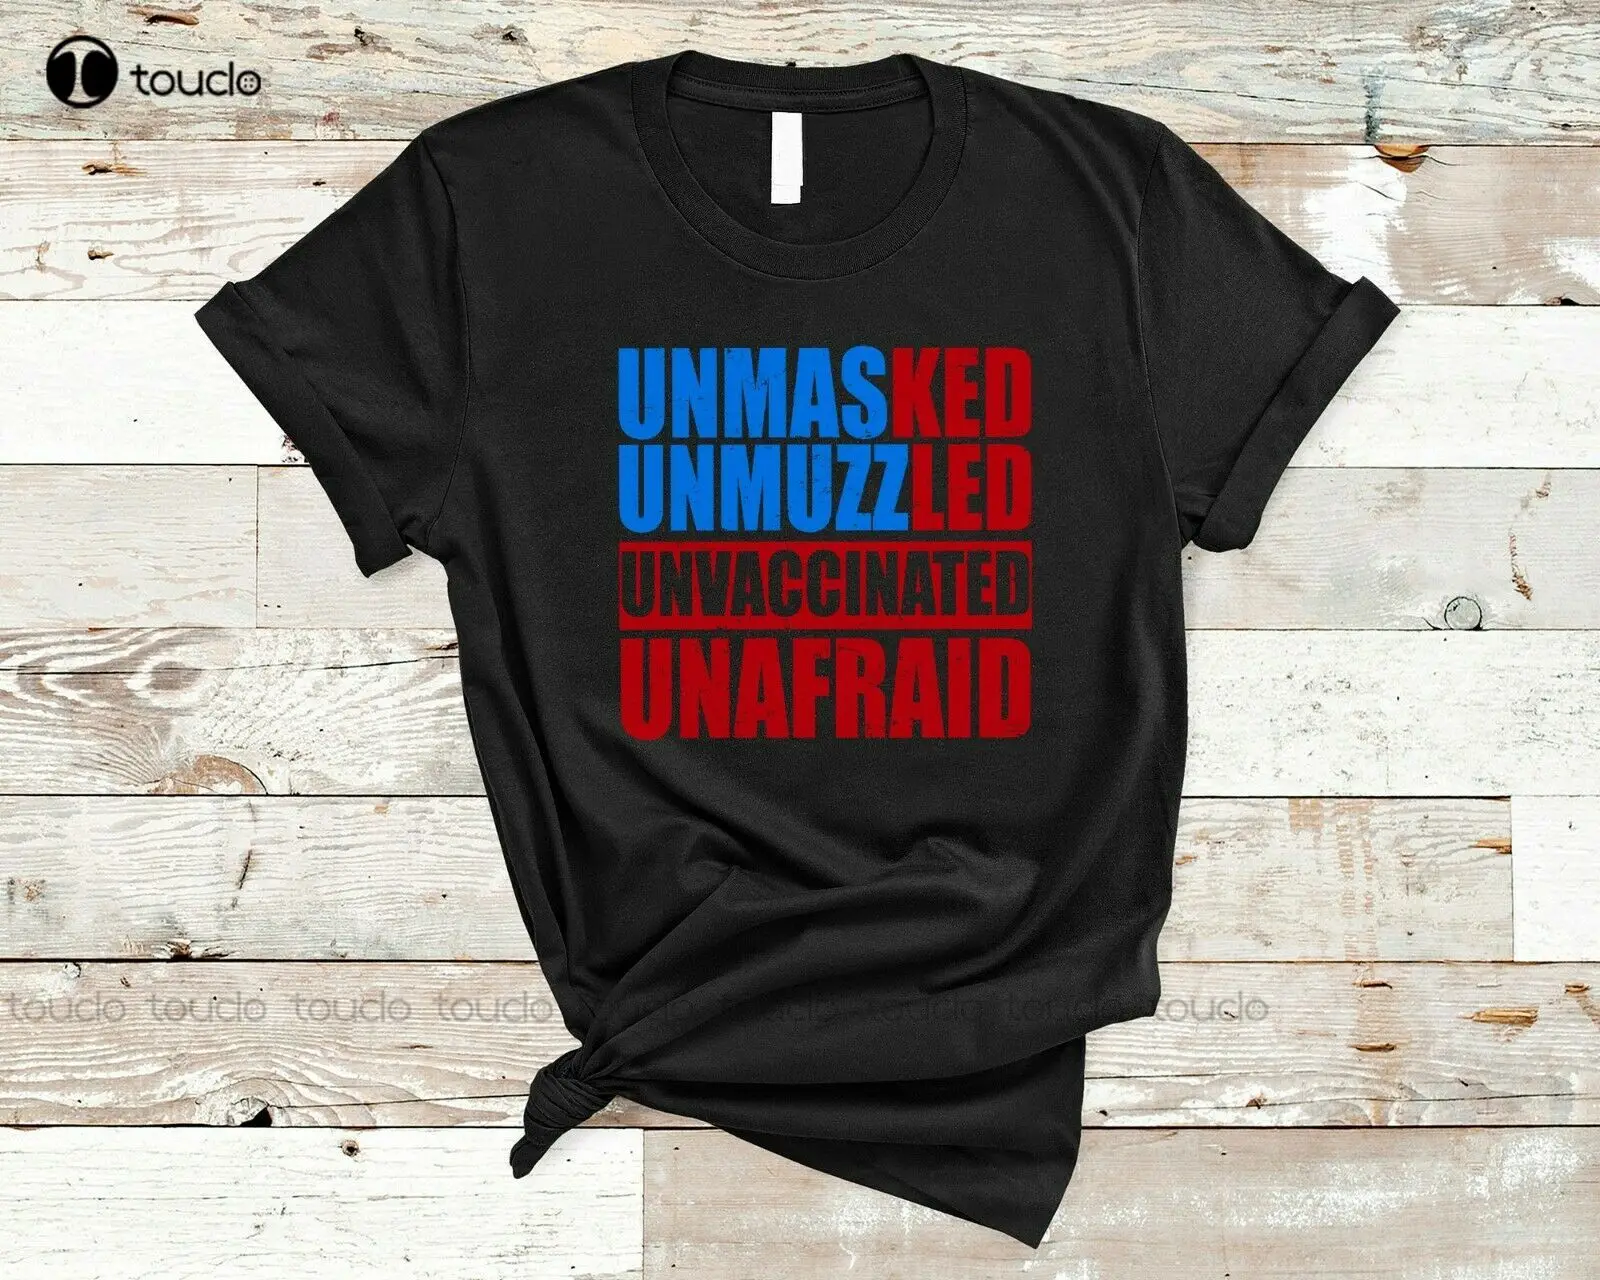 

New Unmasked Unmuzzled Unvaccinated Unafraid Cool Saying American Lover T-Shirt Cotton Tee Shirt Unisex